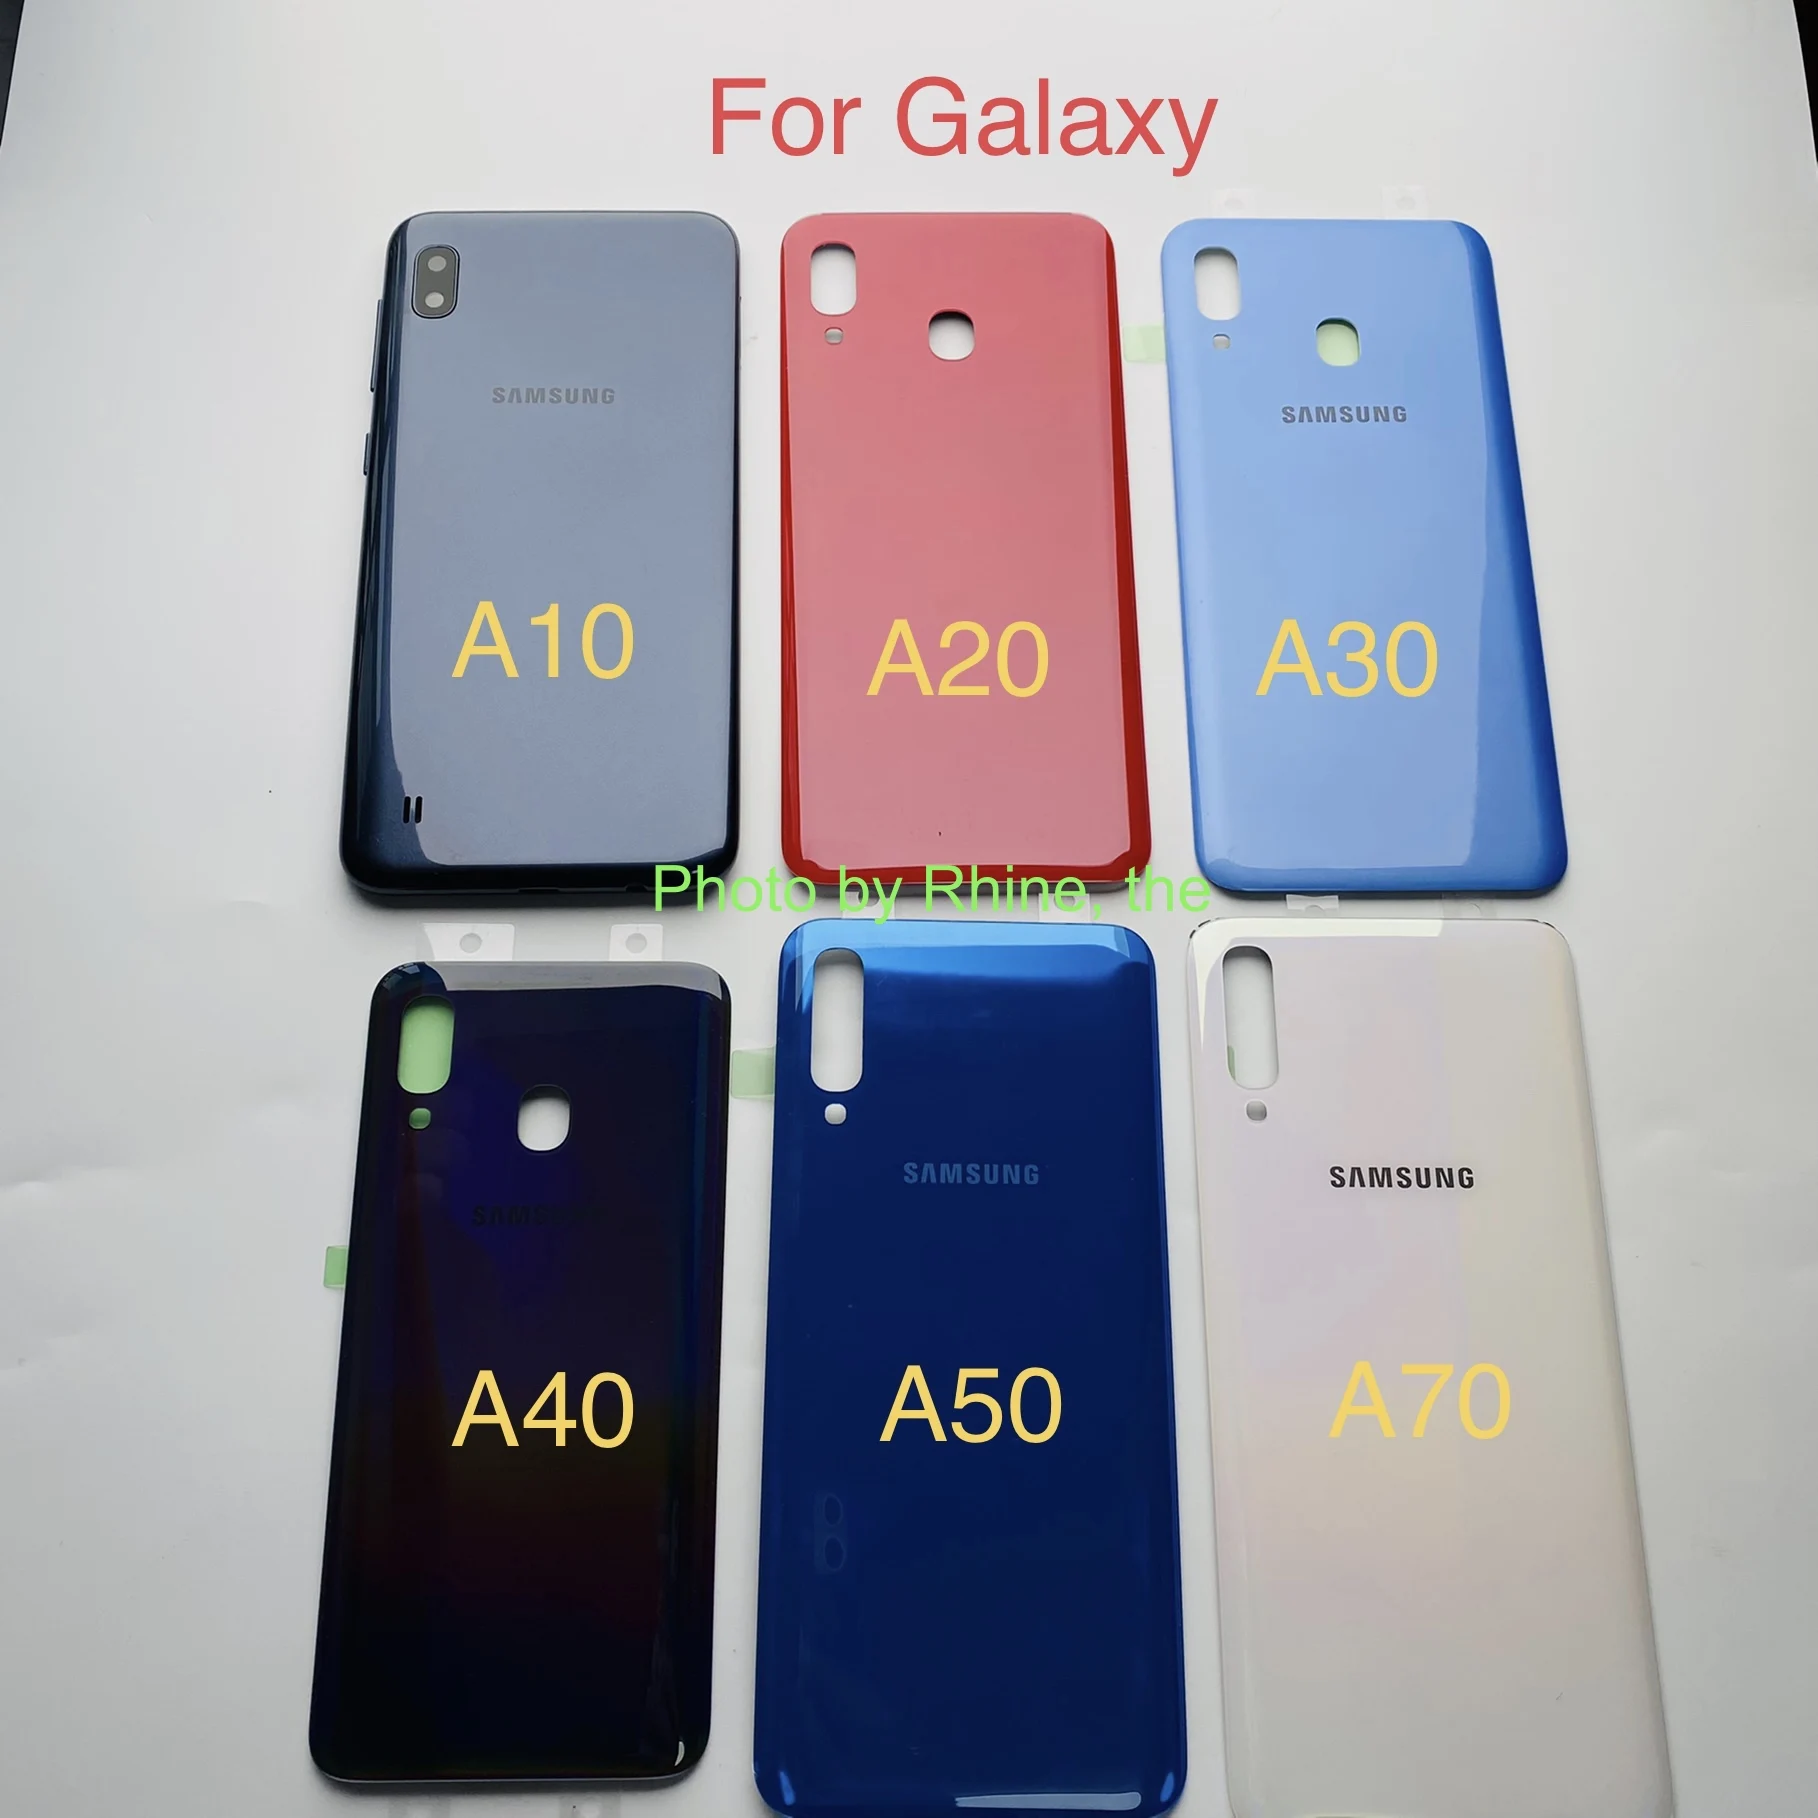 For Samsung Galaxy A10 A20 A30 A40 A50 A70 2019 Battery Back Cover Door Housing Replacement Repair Parts A50 Back Battery Cover